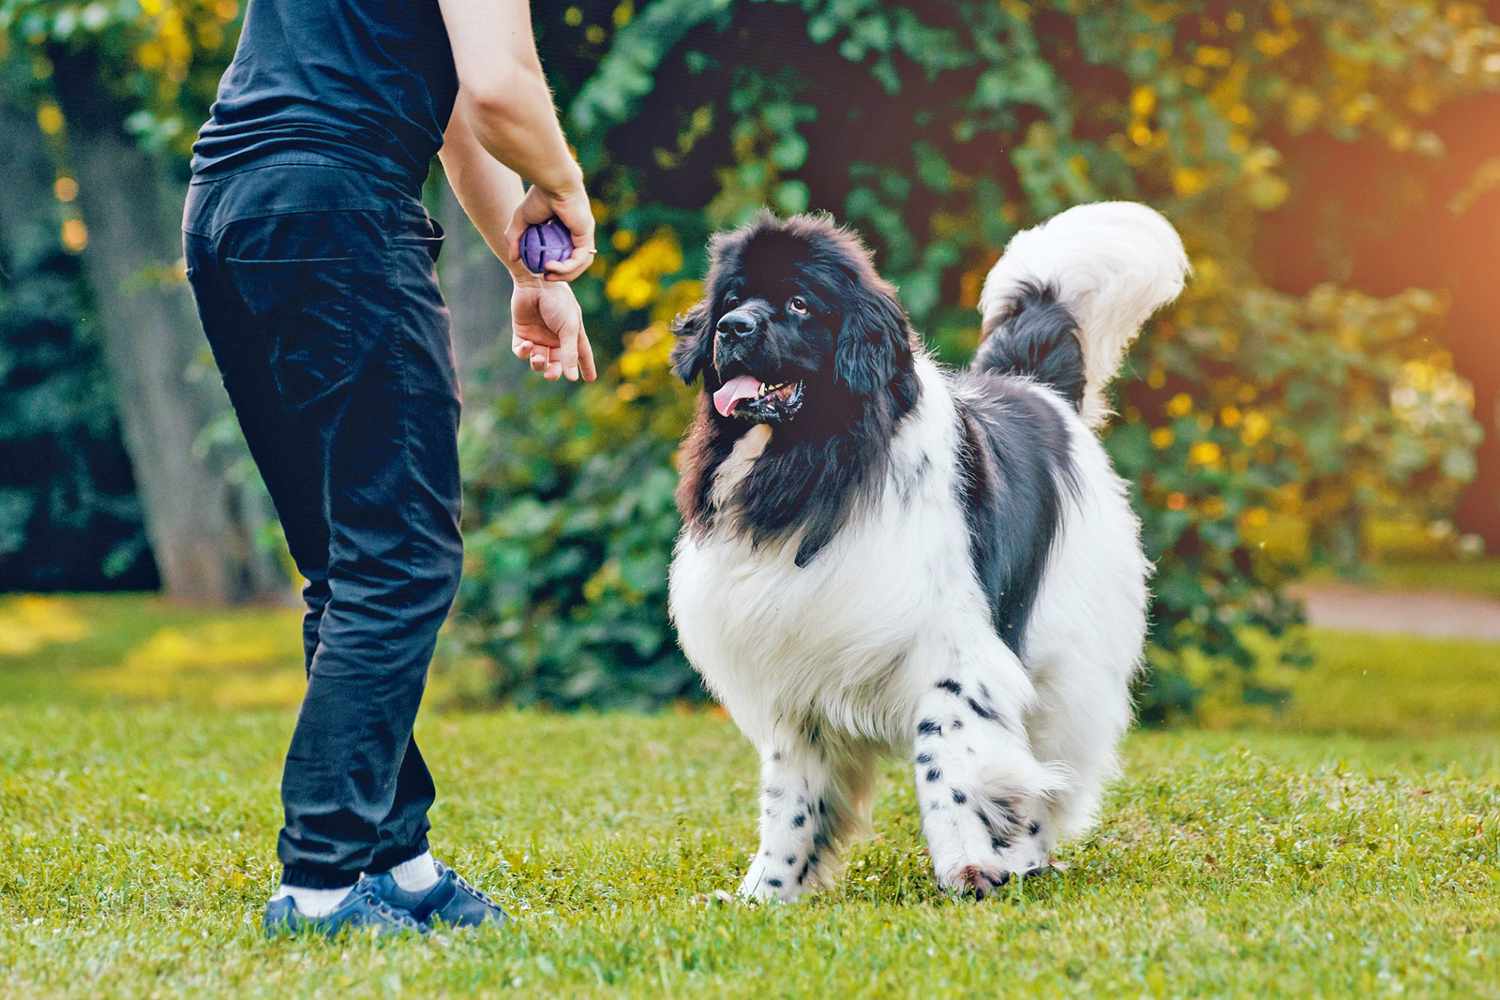 Newfoundland dog, one of the tallest dog breeds, plays ball with his owner